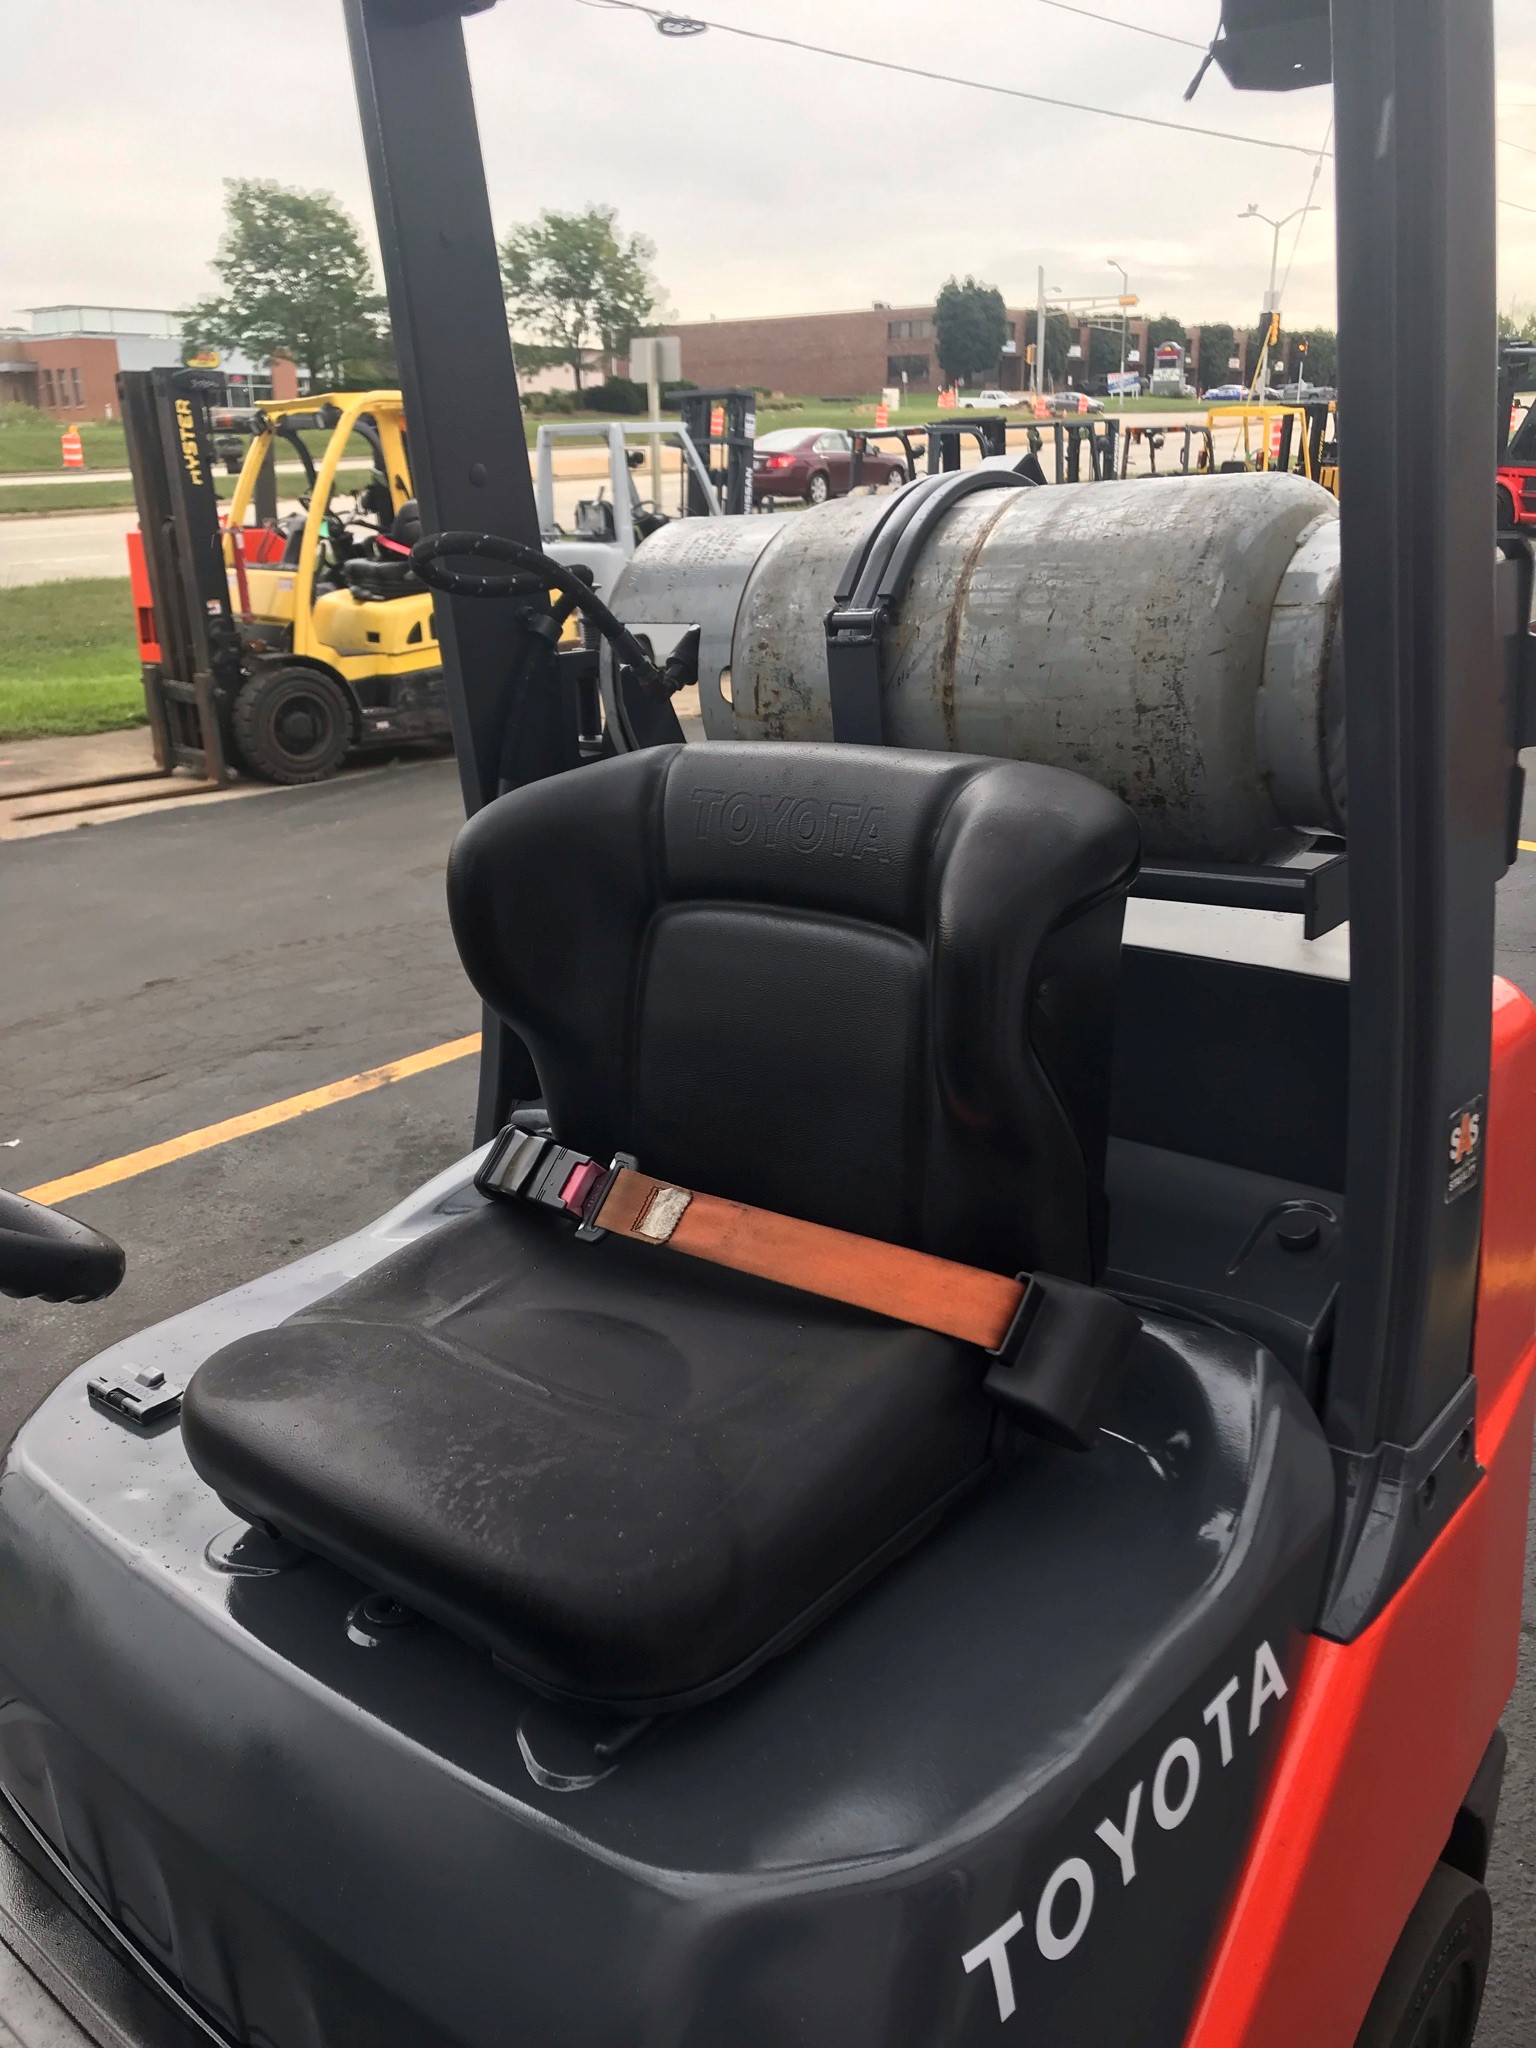 Orange toyota forklift with power steering for sale